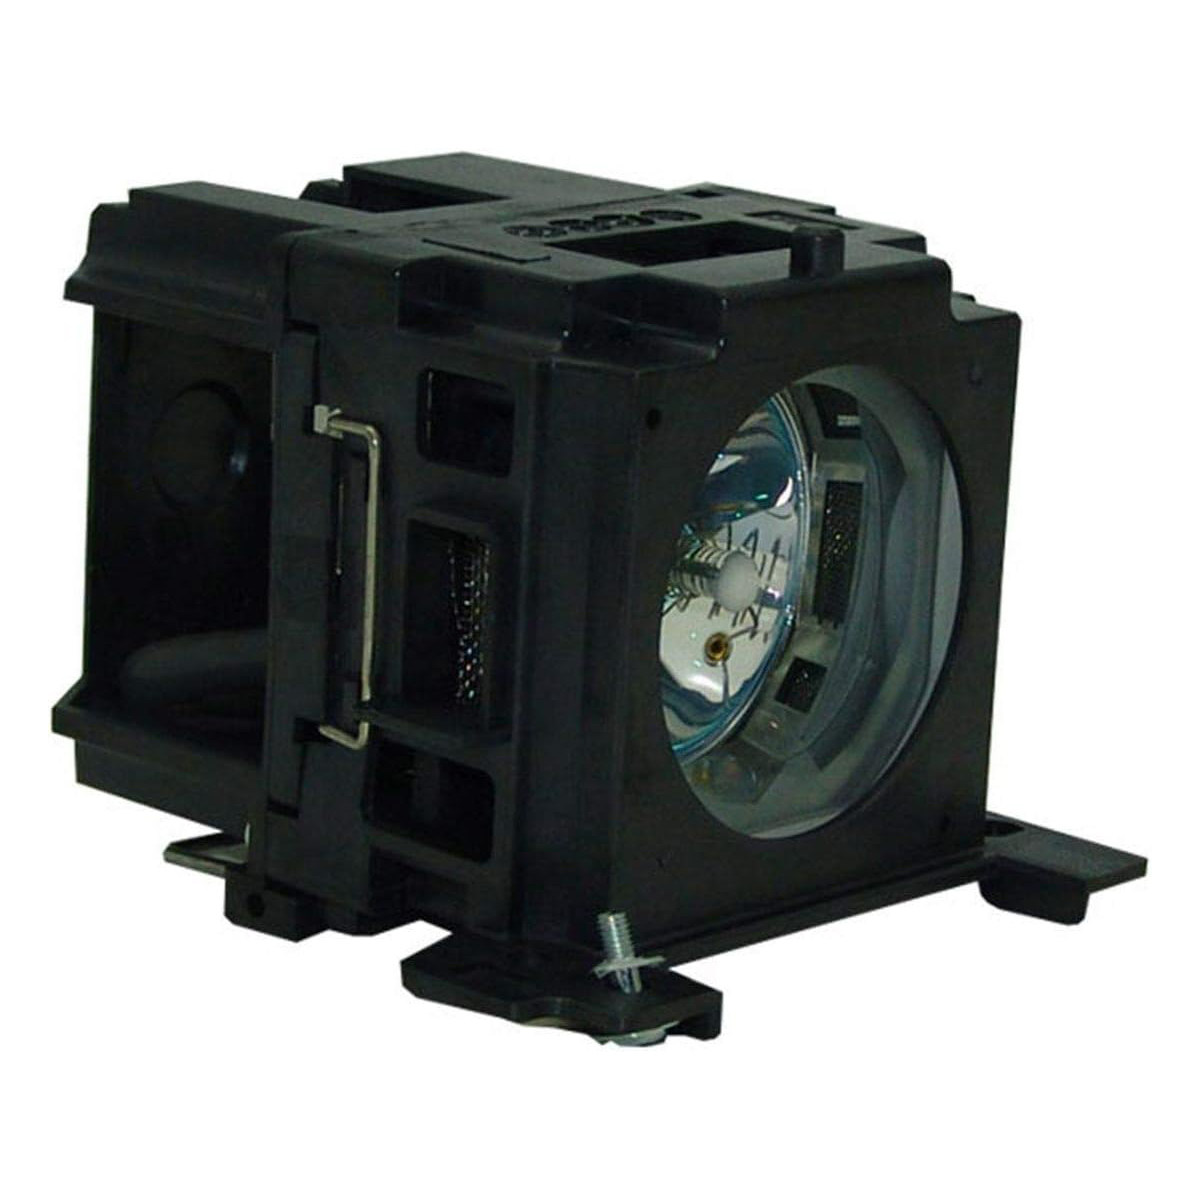 Replacement Projector lamp DT00731 For Hitachi CP-HS2175 CP-HX2175 CP-S240 CP-S245